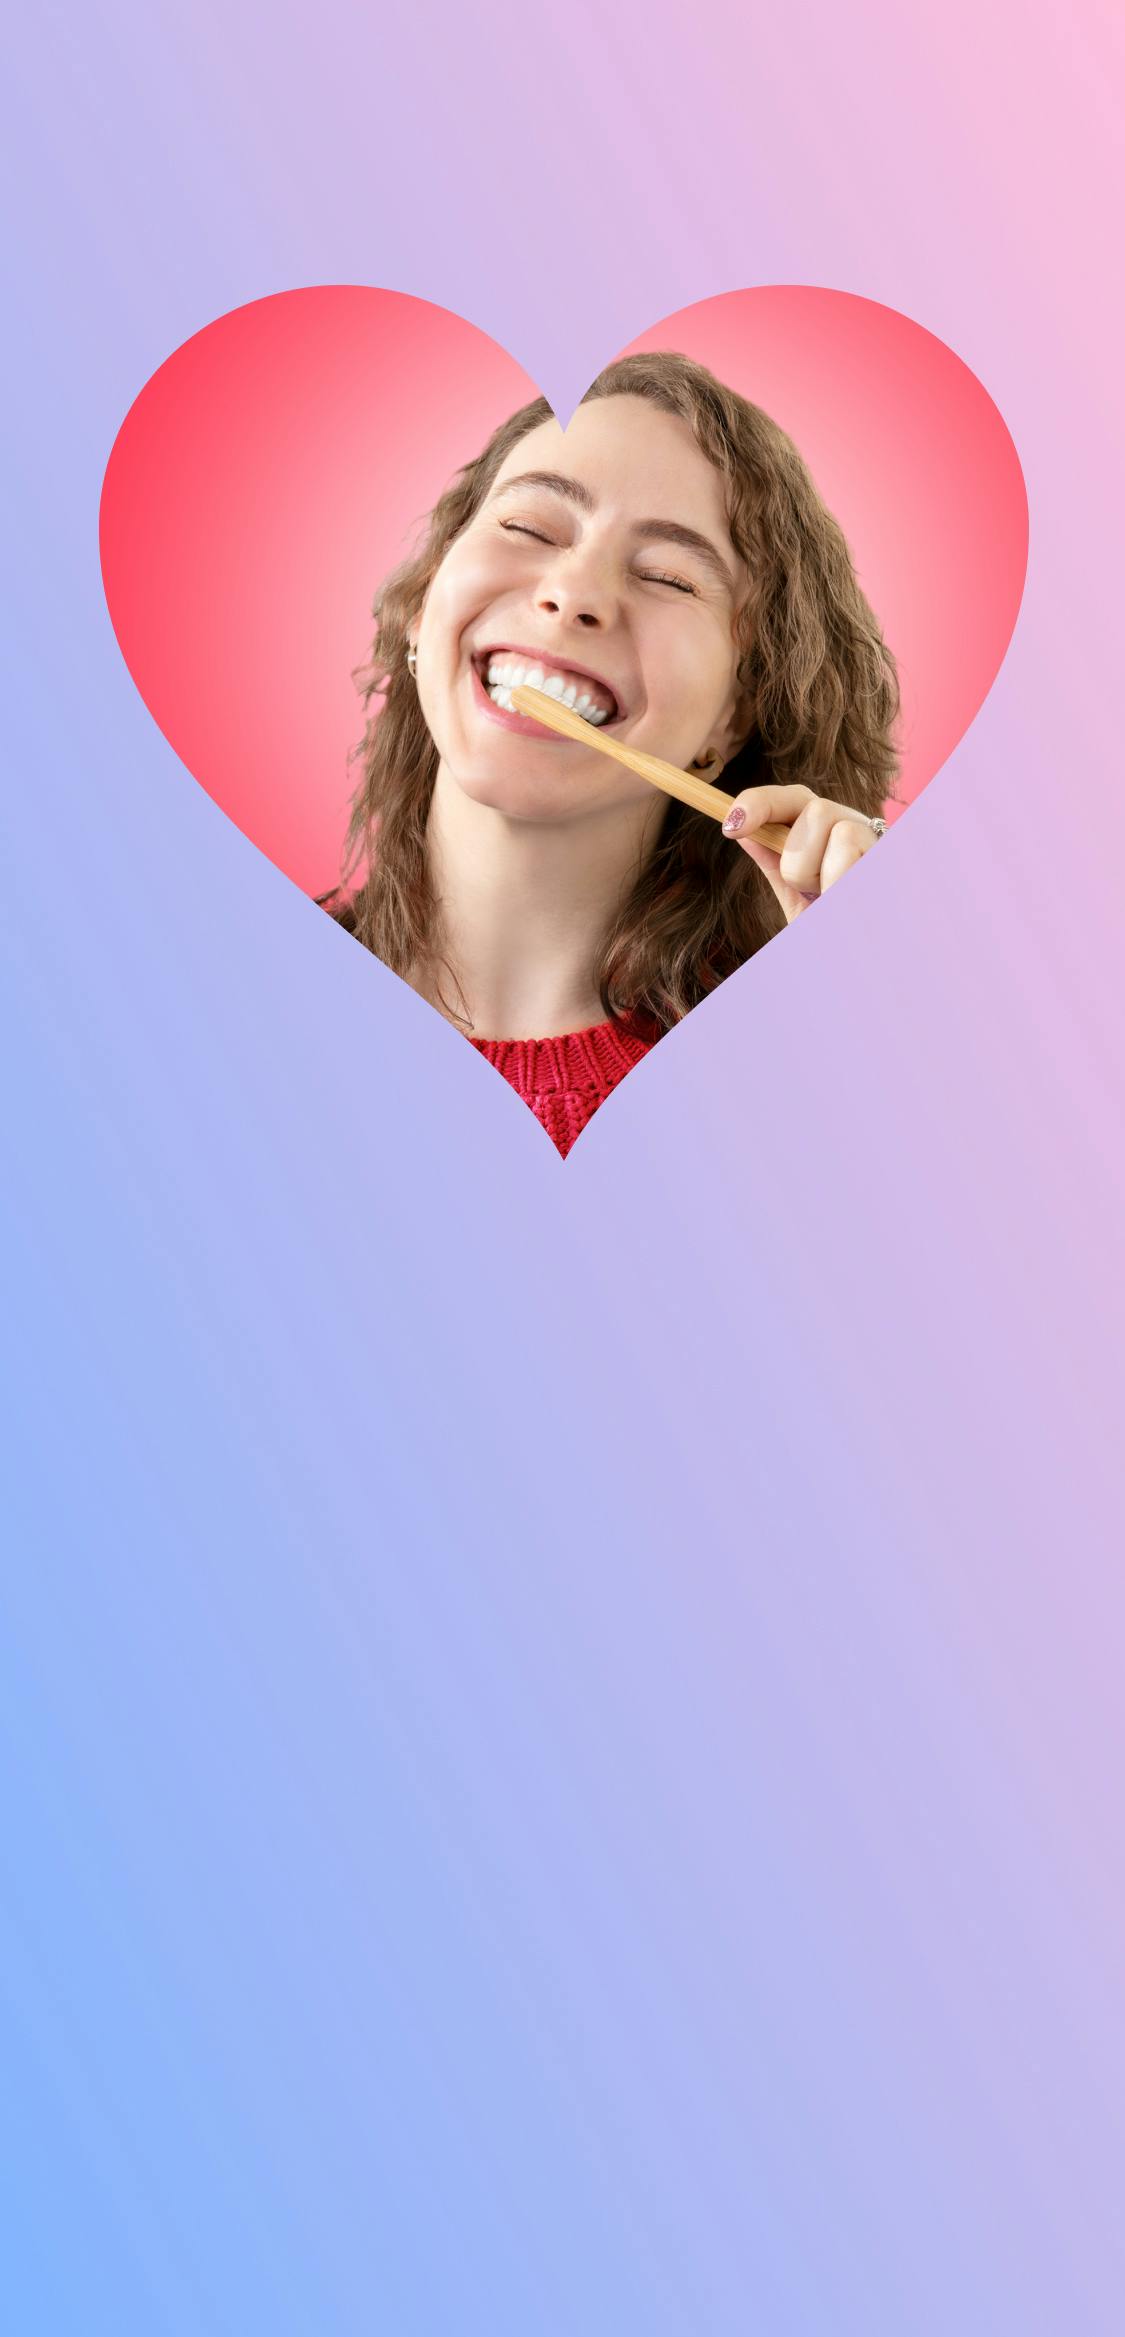 Close up photo of a woman brushing her teeth with a Pearlii Mosobrush, while smiling, inside the image of a heart.